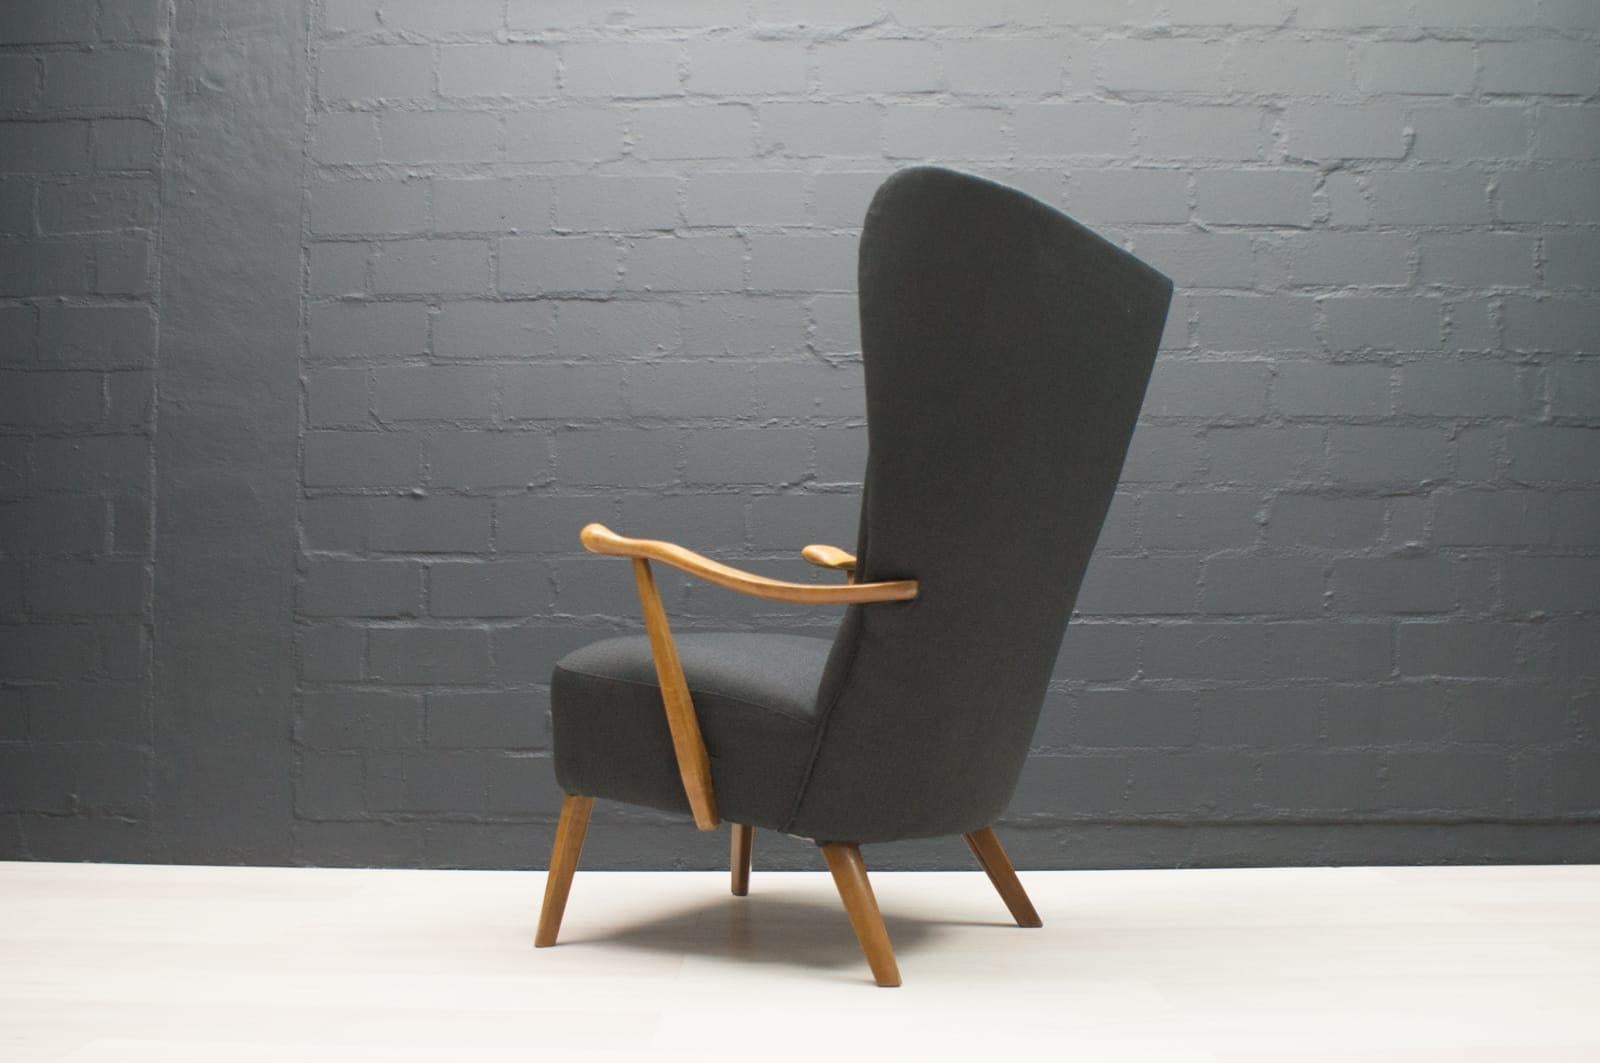 Italian large wingback chair in anthracite upholstery.

This Classic Italian modern wing chair has an unusually high backrest and graceful wings. The elegant armrests are slightly curved outwards, are ergonomically shaped and the seat has gently